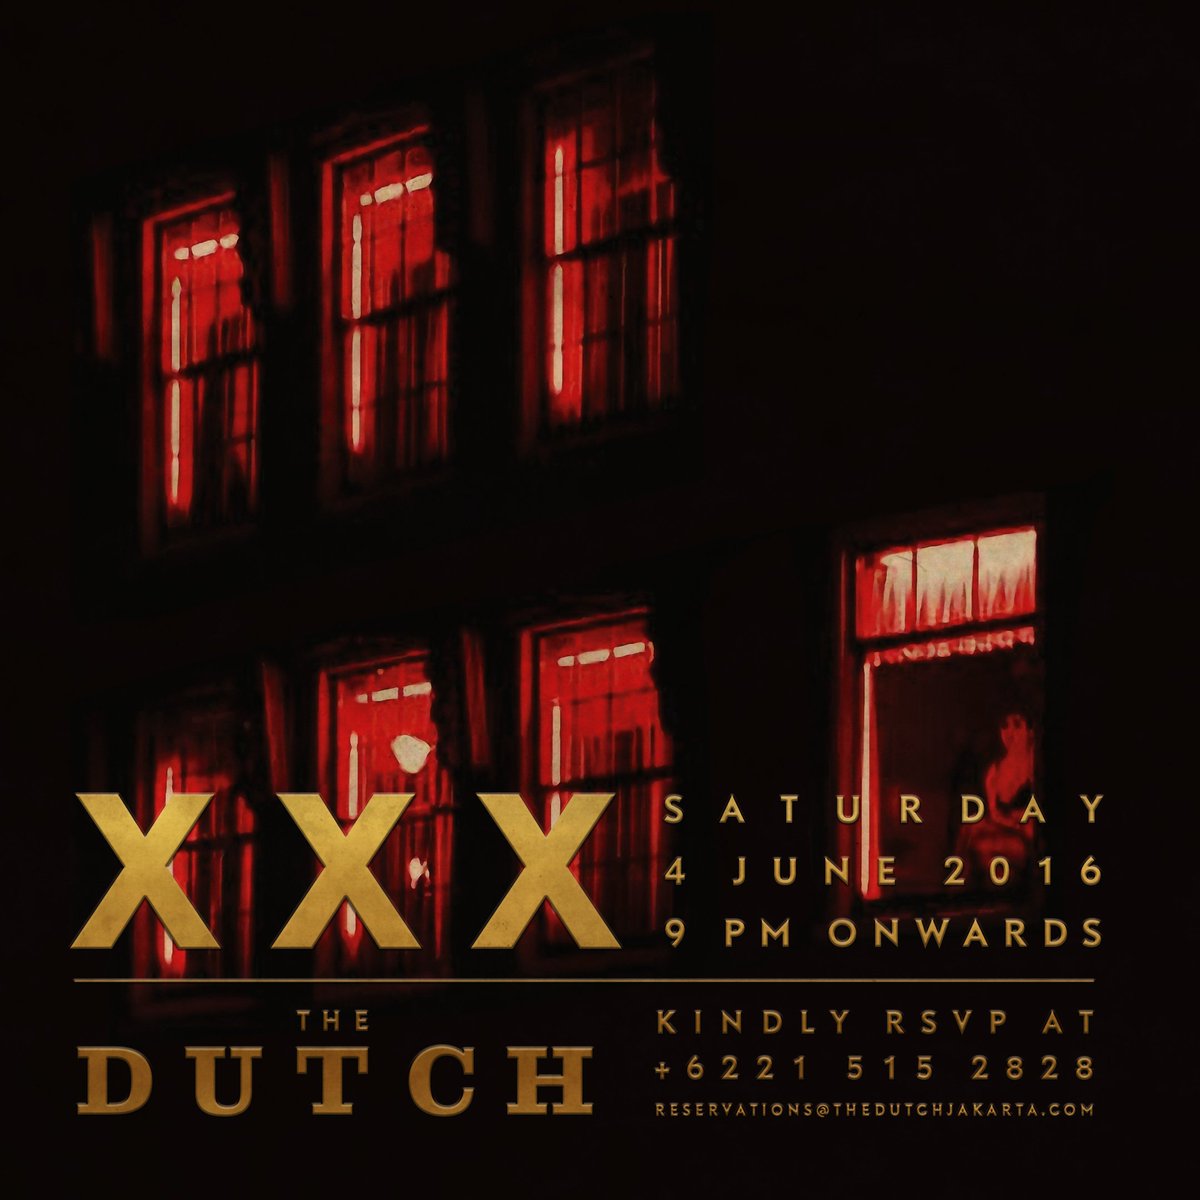 XXX at THE DUTCH - a cheeky night featuring DJ BERGAS HARYADITA! For more info, please call +6221 515 28 28